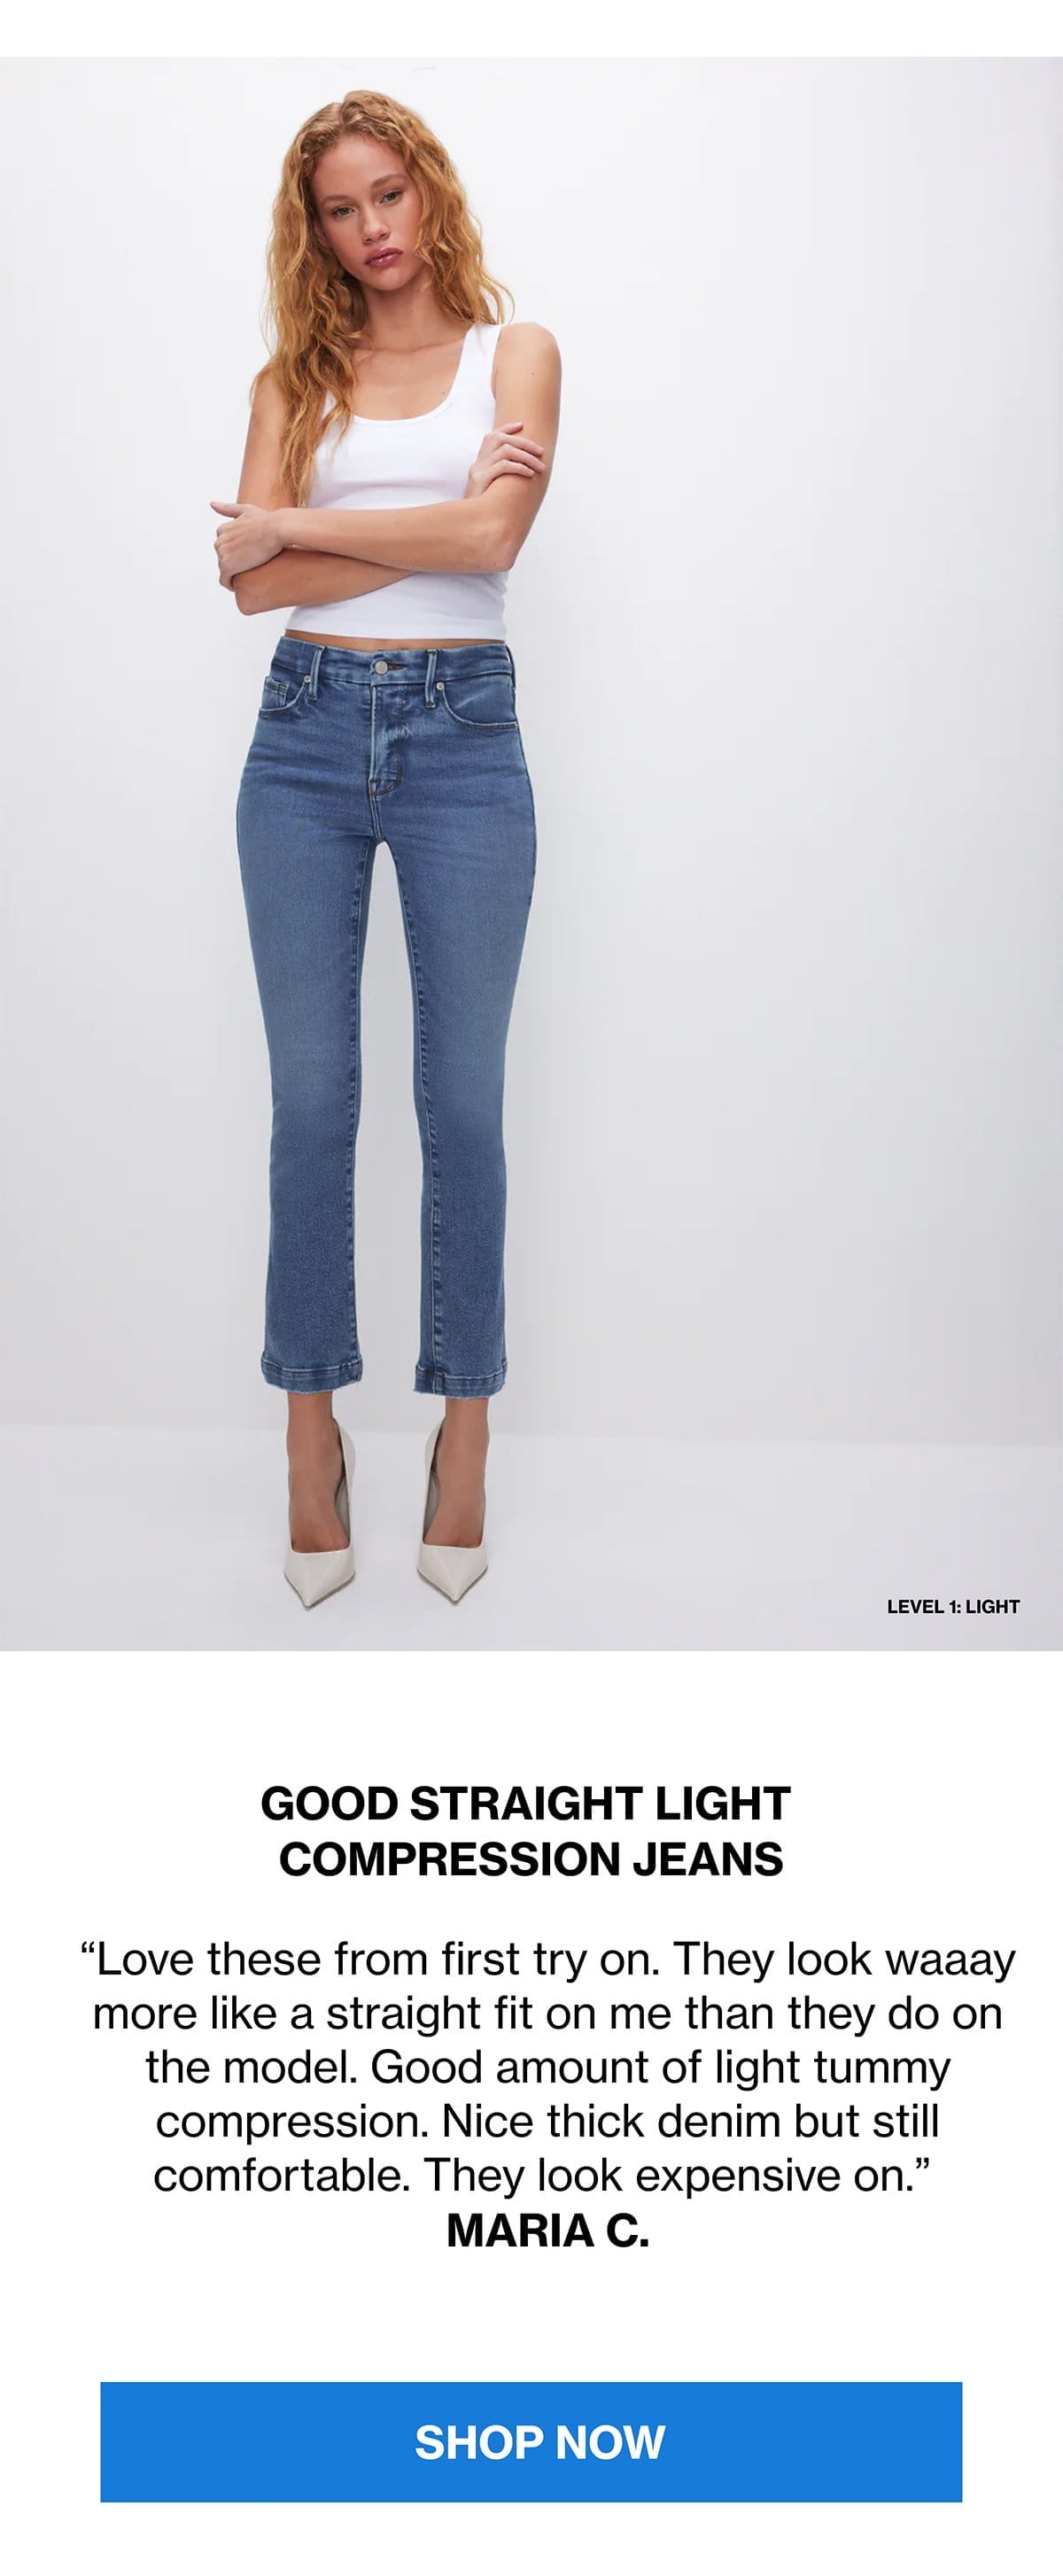 GOOD STRAIGHT COMPRESSION JEANS